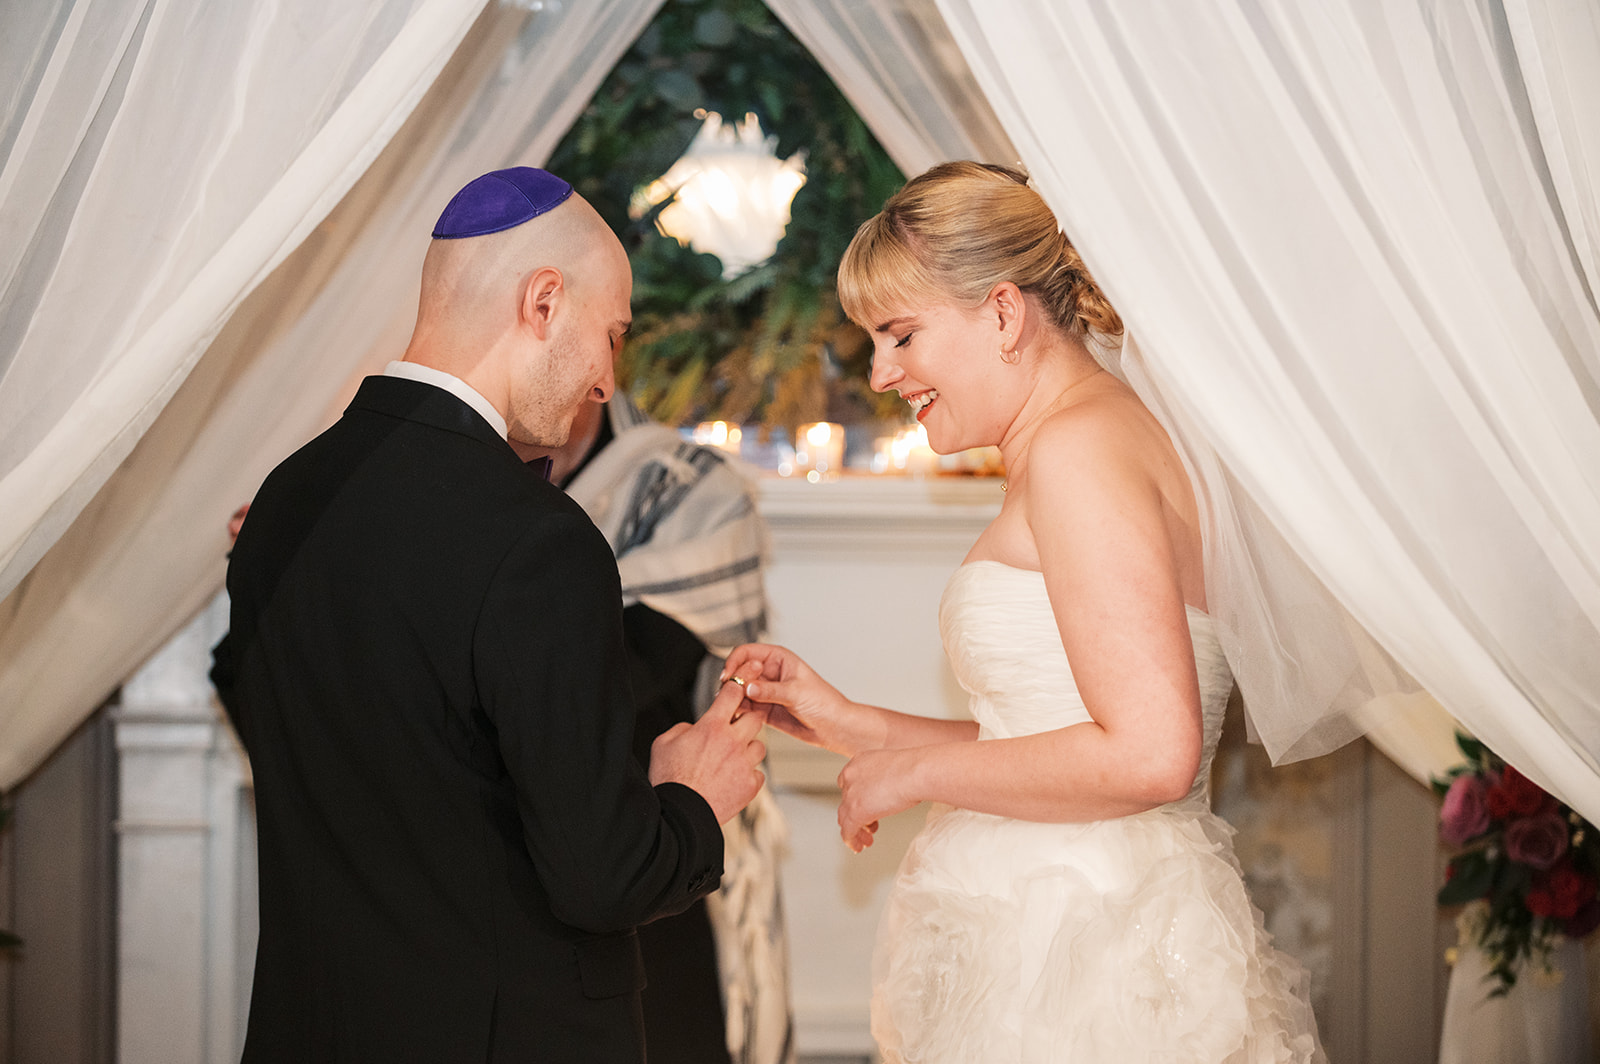 A bride puts the ring on her groom's finger at the altar